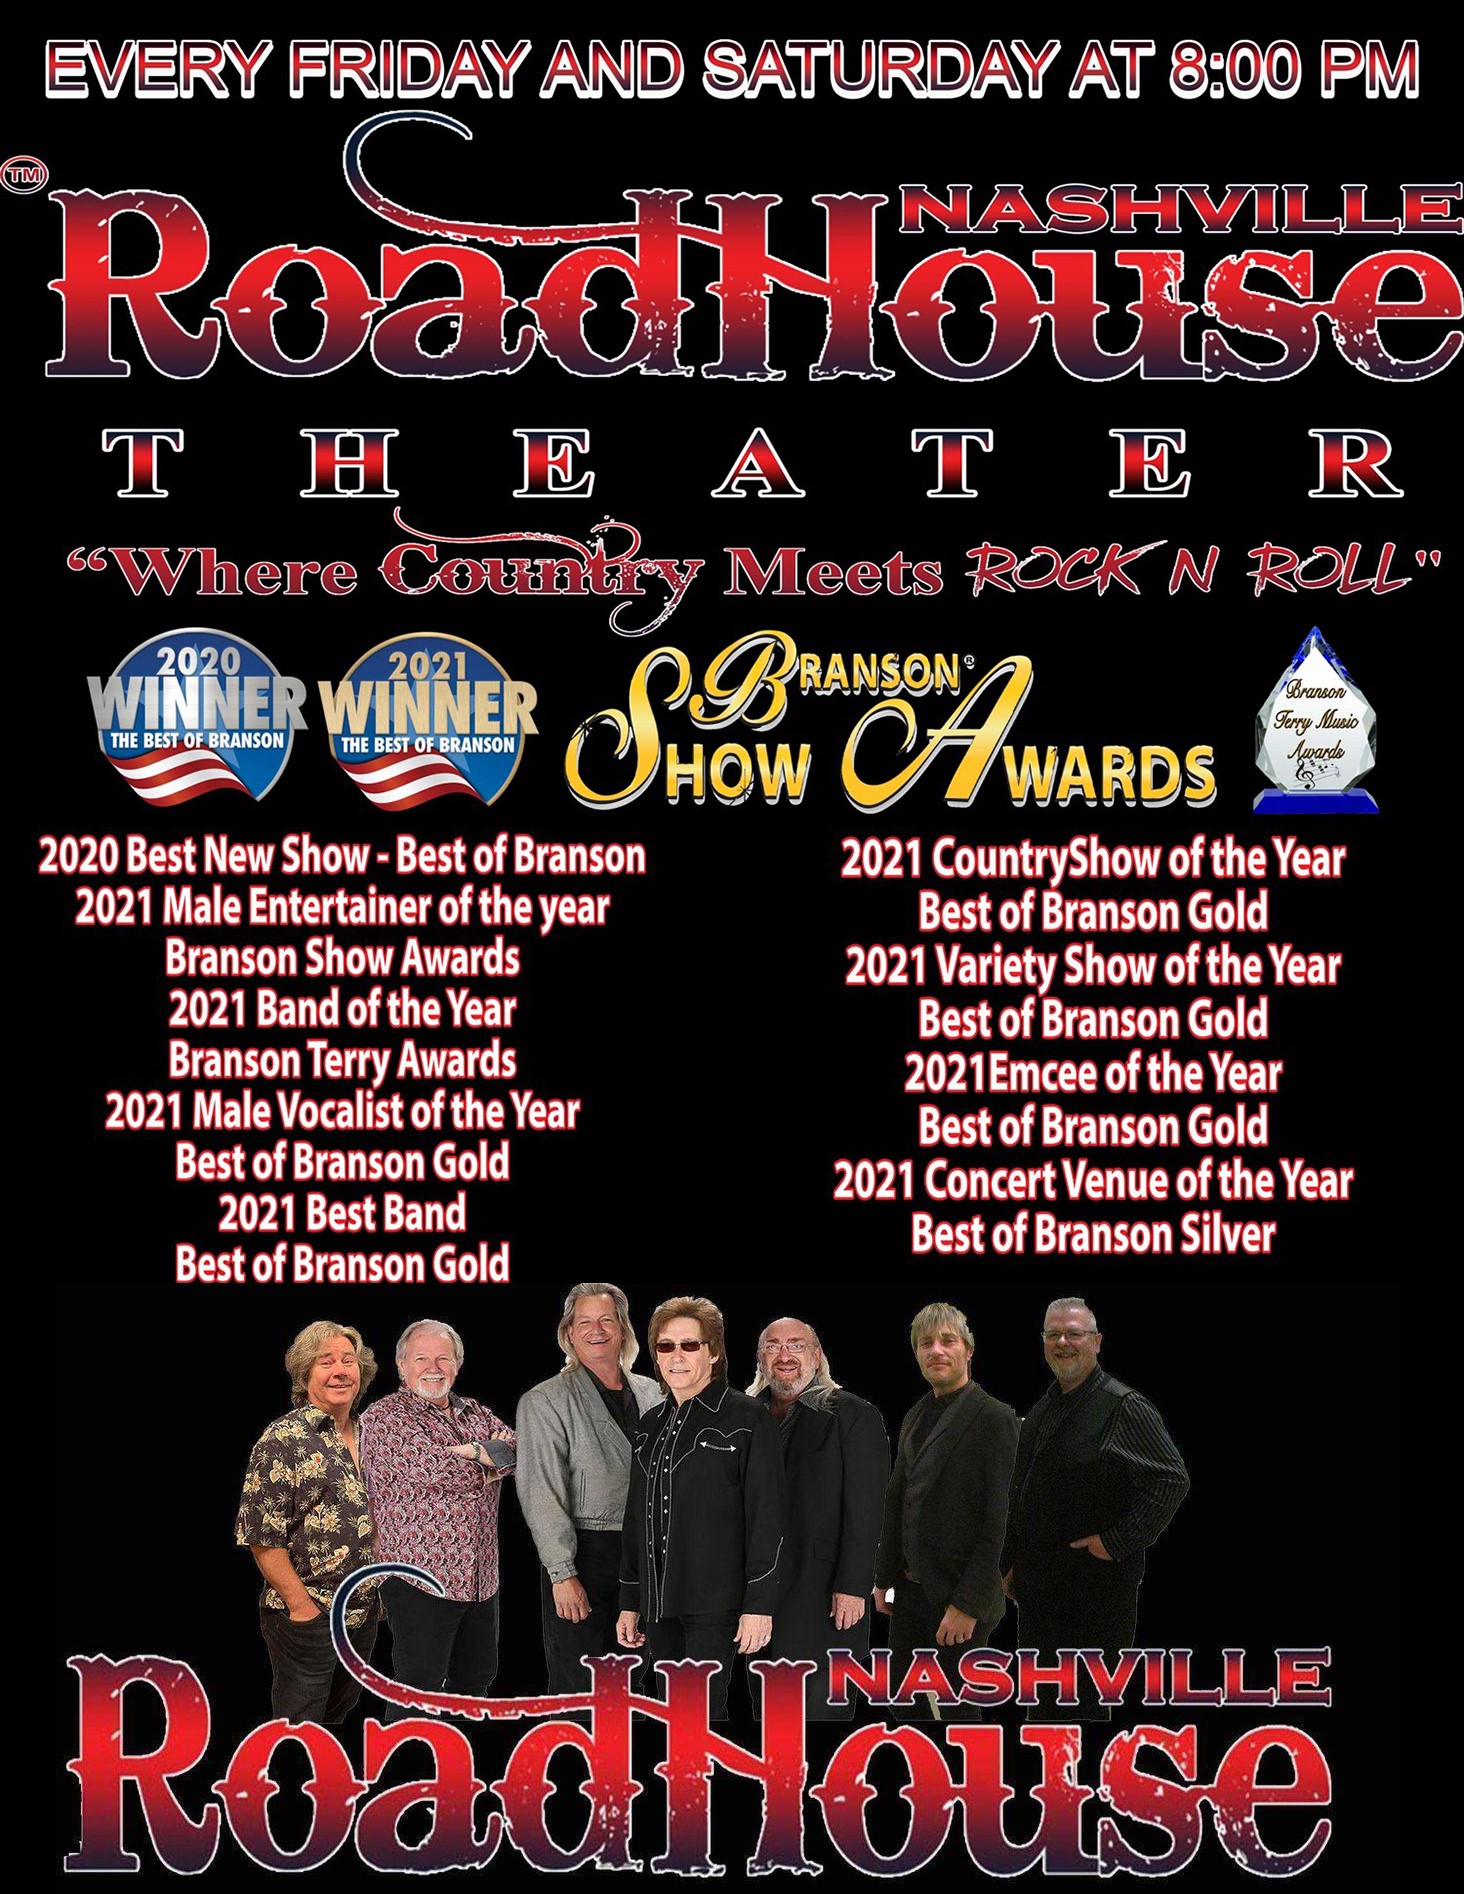 Nashville Roadhouse Live Where Country Meets Rock N Roll on dic. 19, 00:00@Nashville Roadhouse Theater at The Branson Star - Pick a seat, Buy tickets and Get information on nashvilleroadhouse.com bransonstartheater